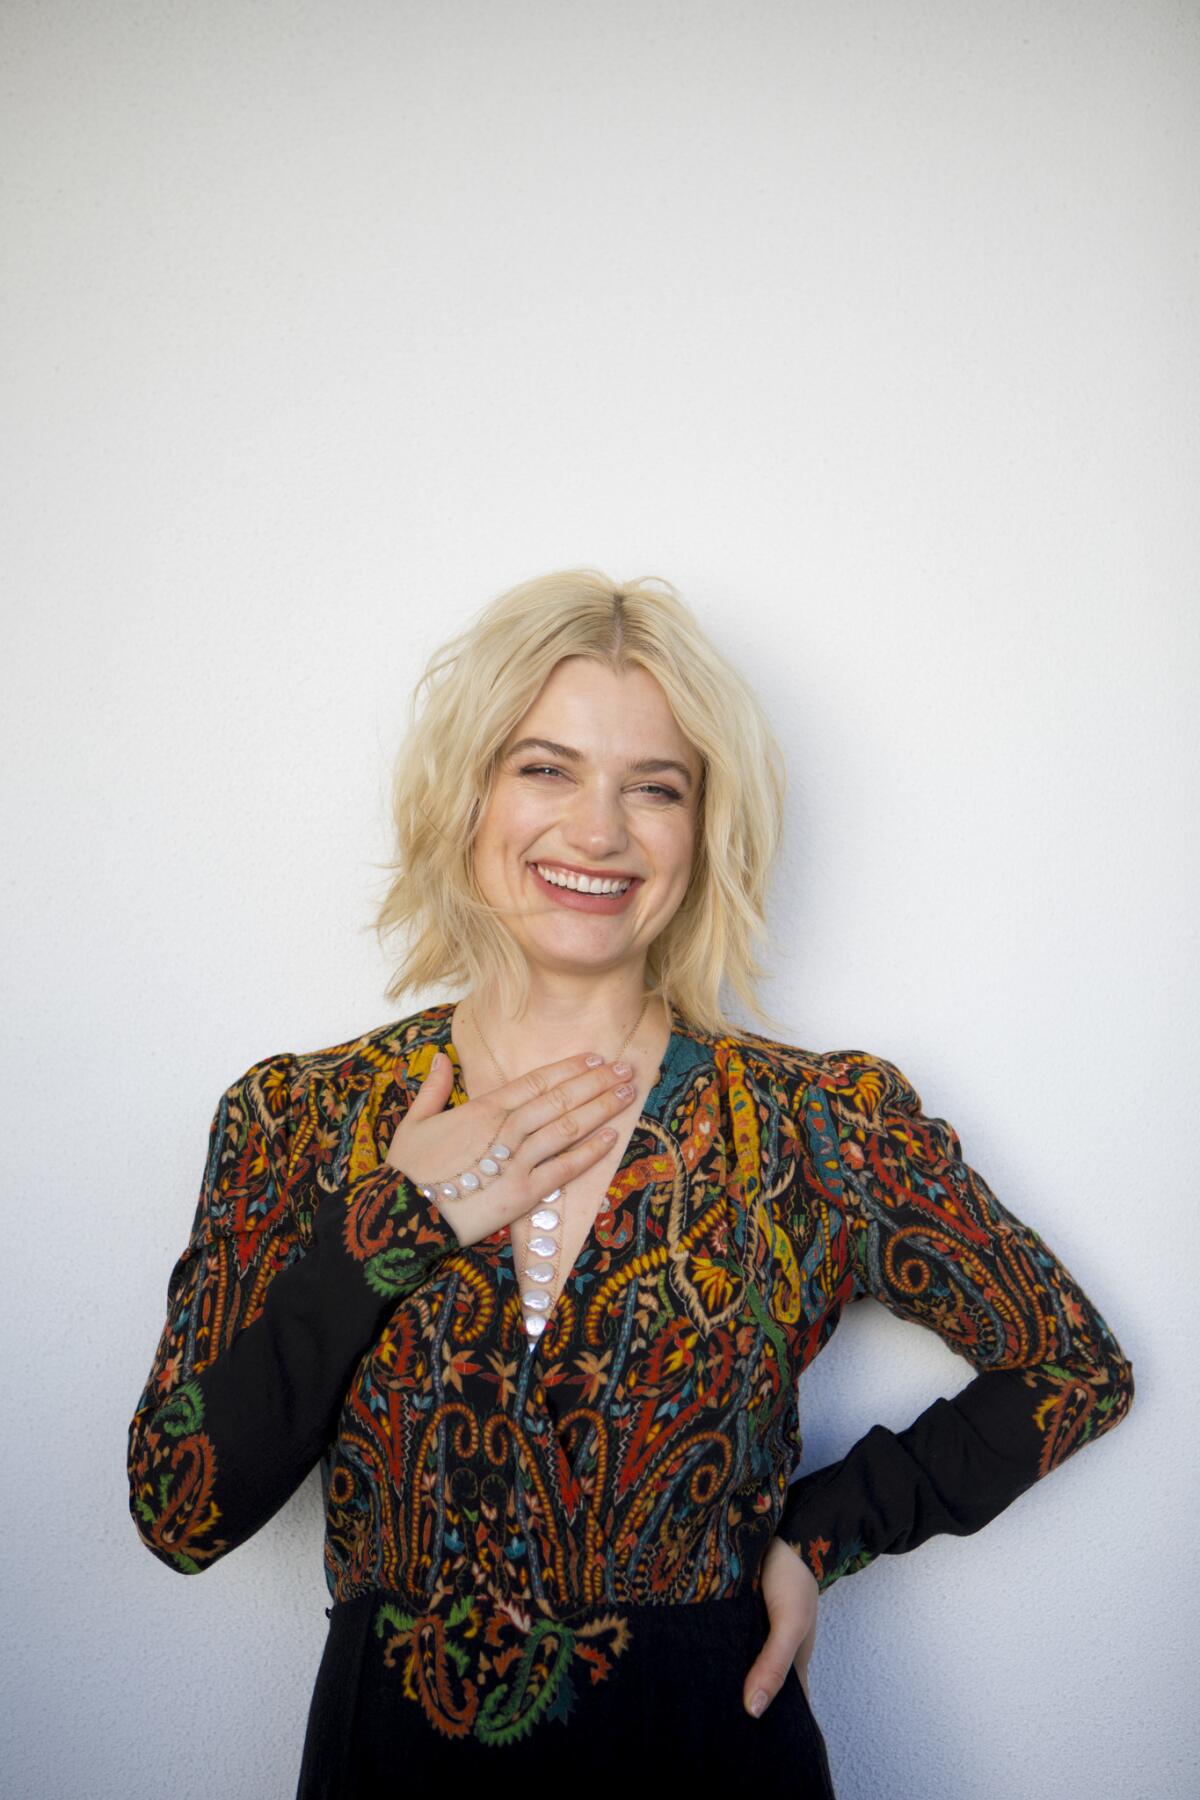 Singer-actress Alison Sudol: "The movie business has been so upright and lovely."